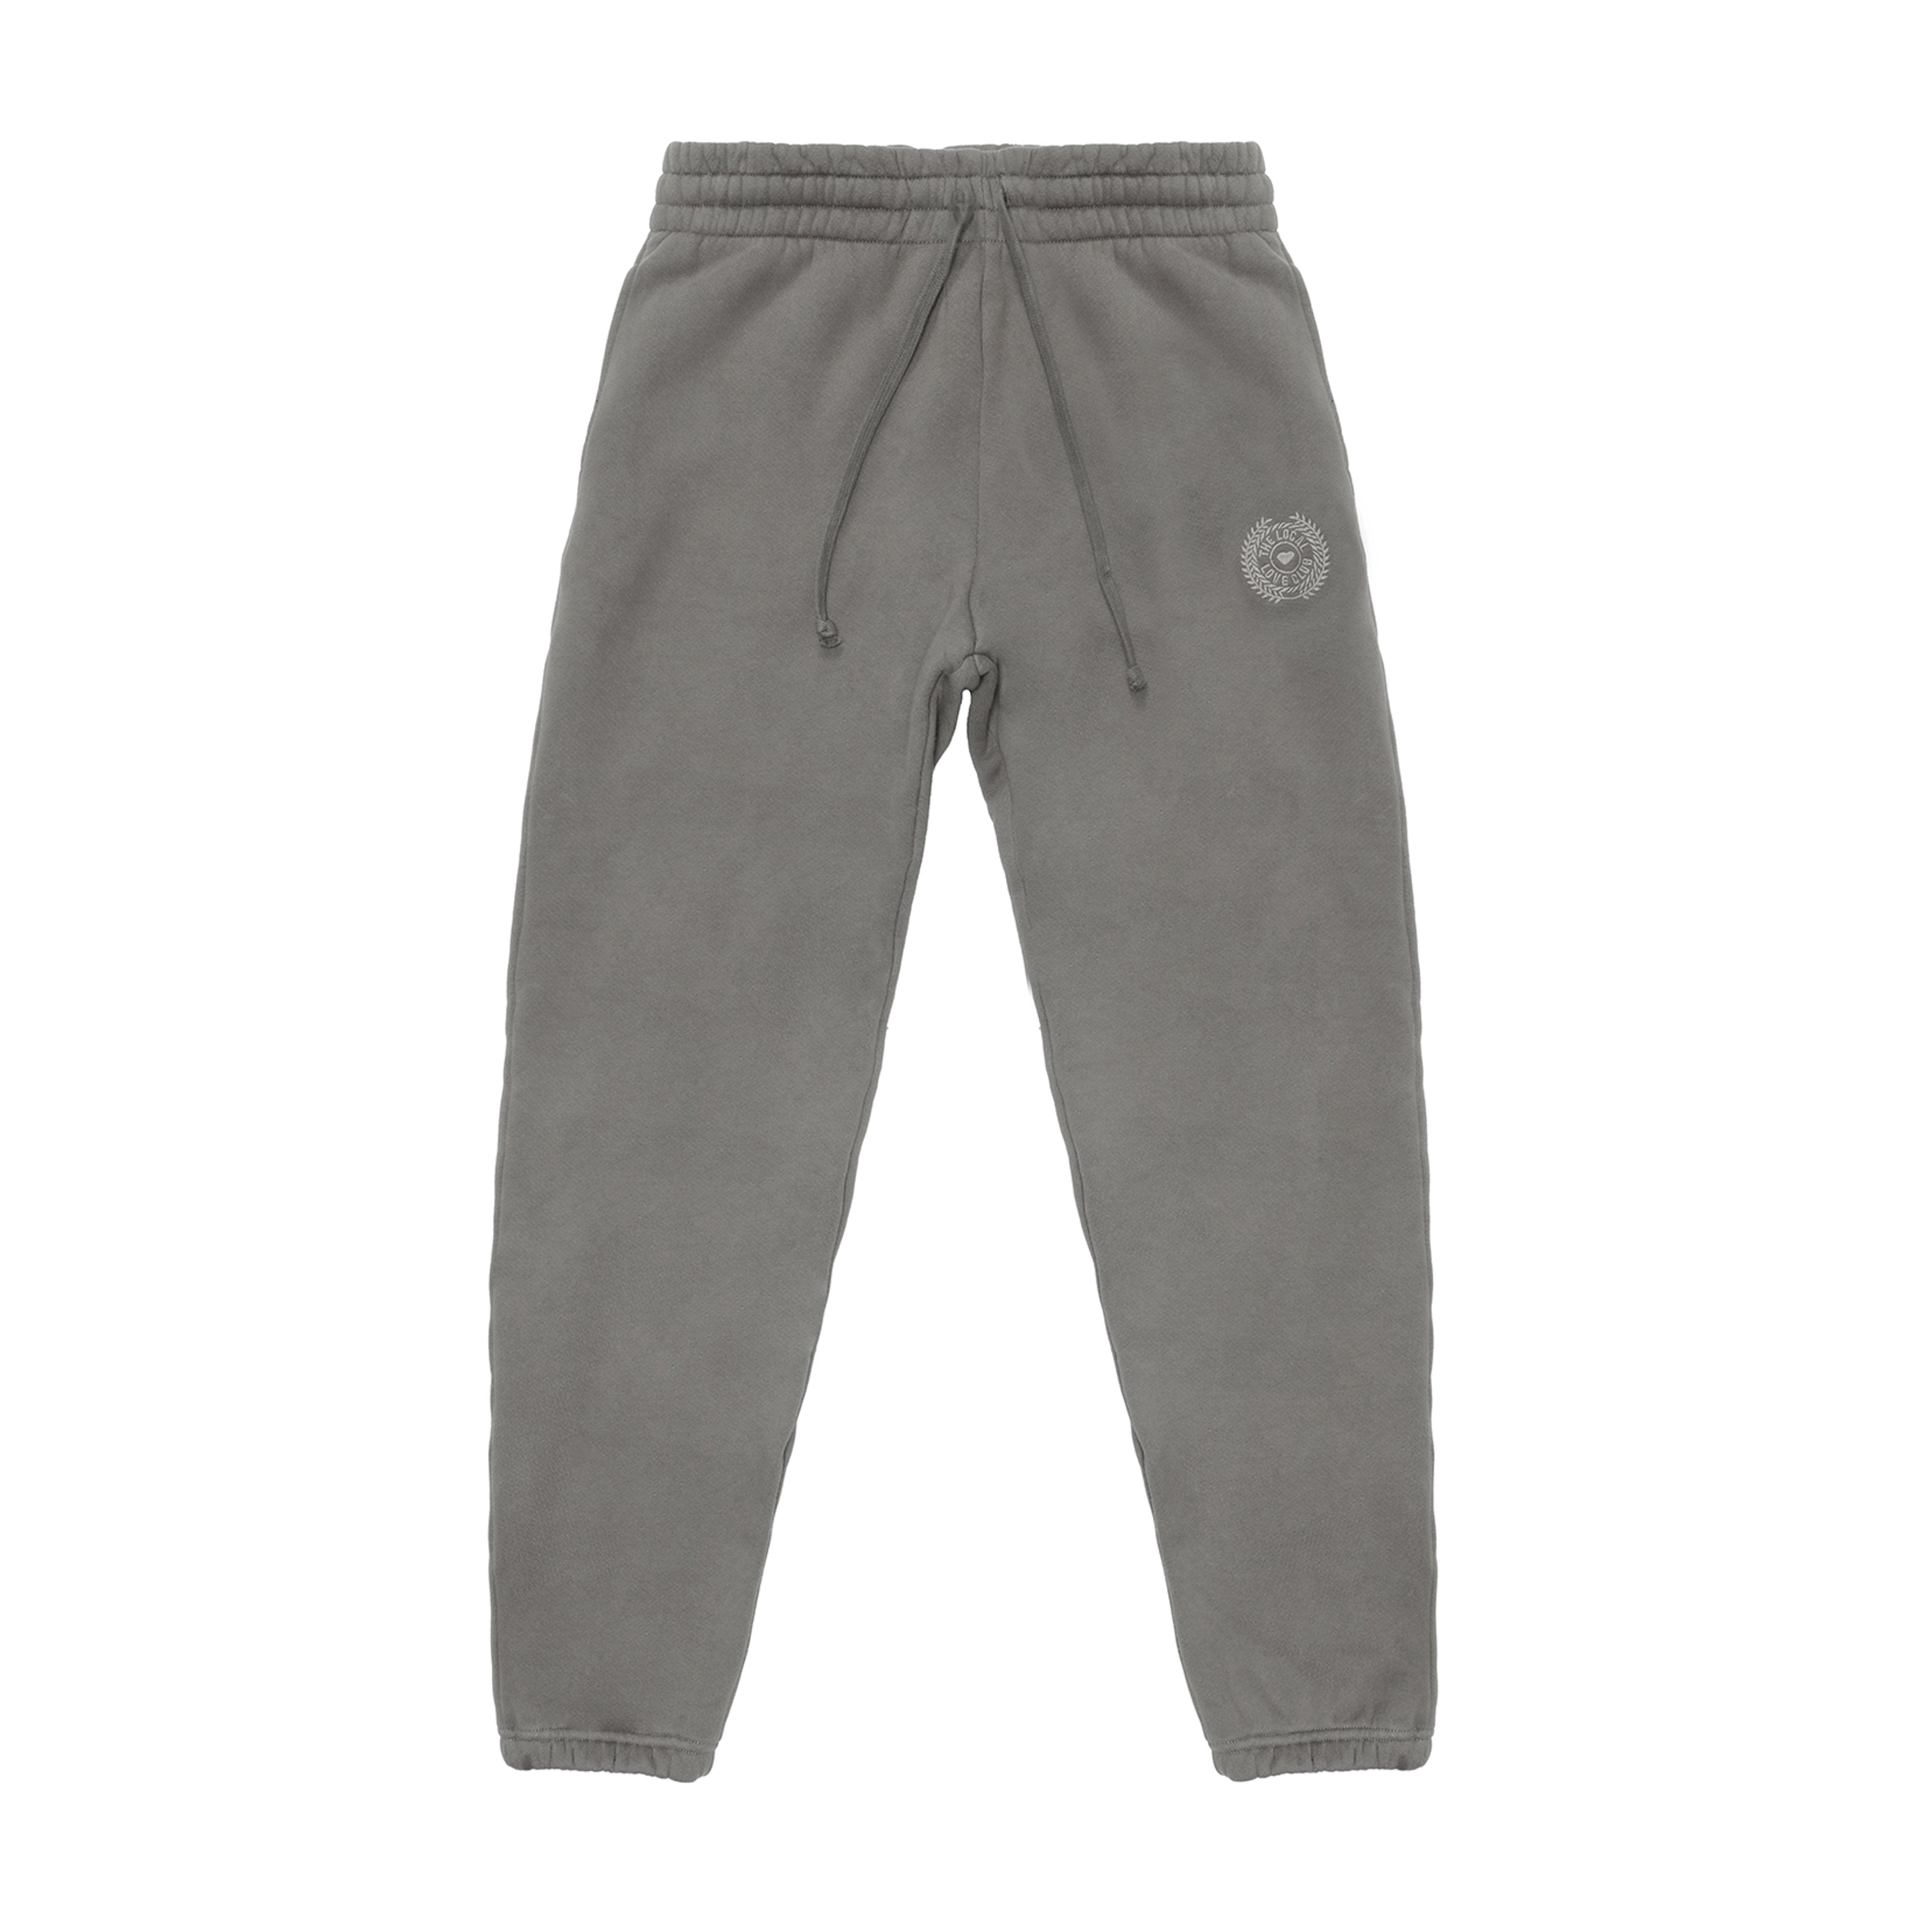 Vitals Pant in Taupe